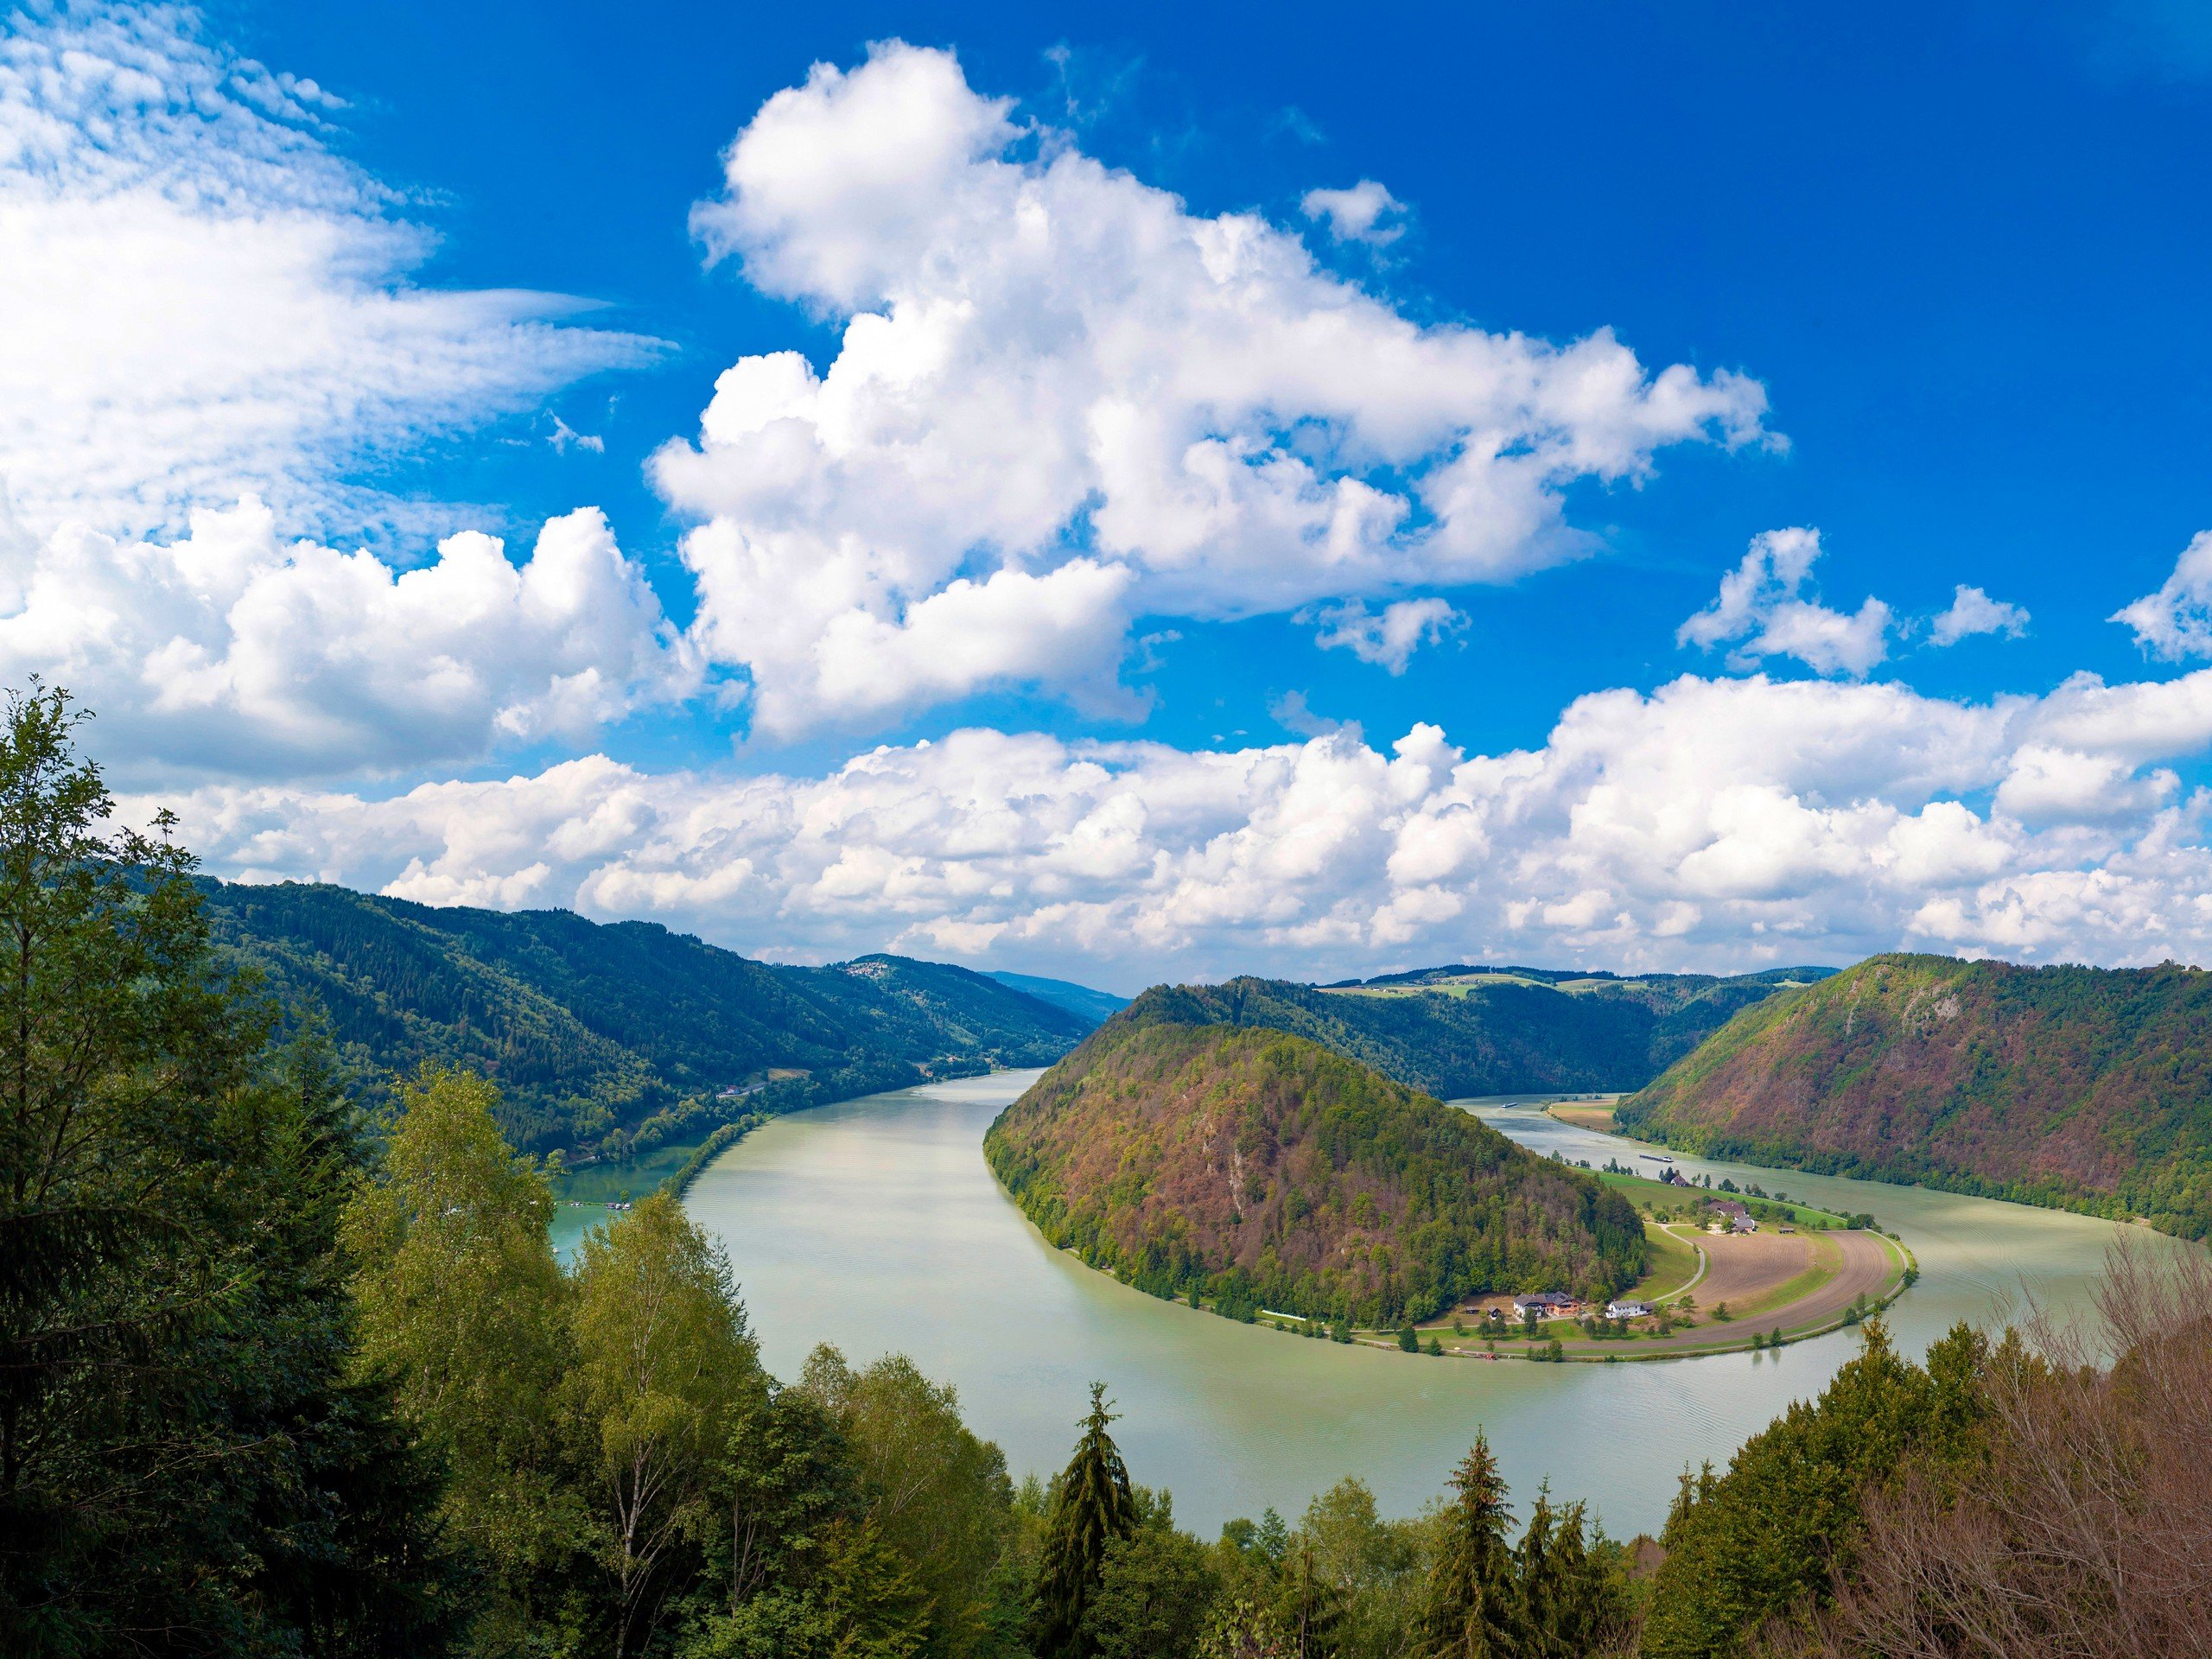 Danube river as seen from the above